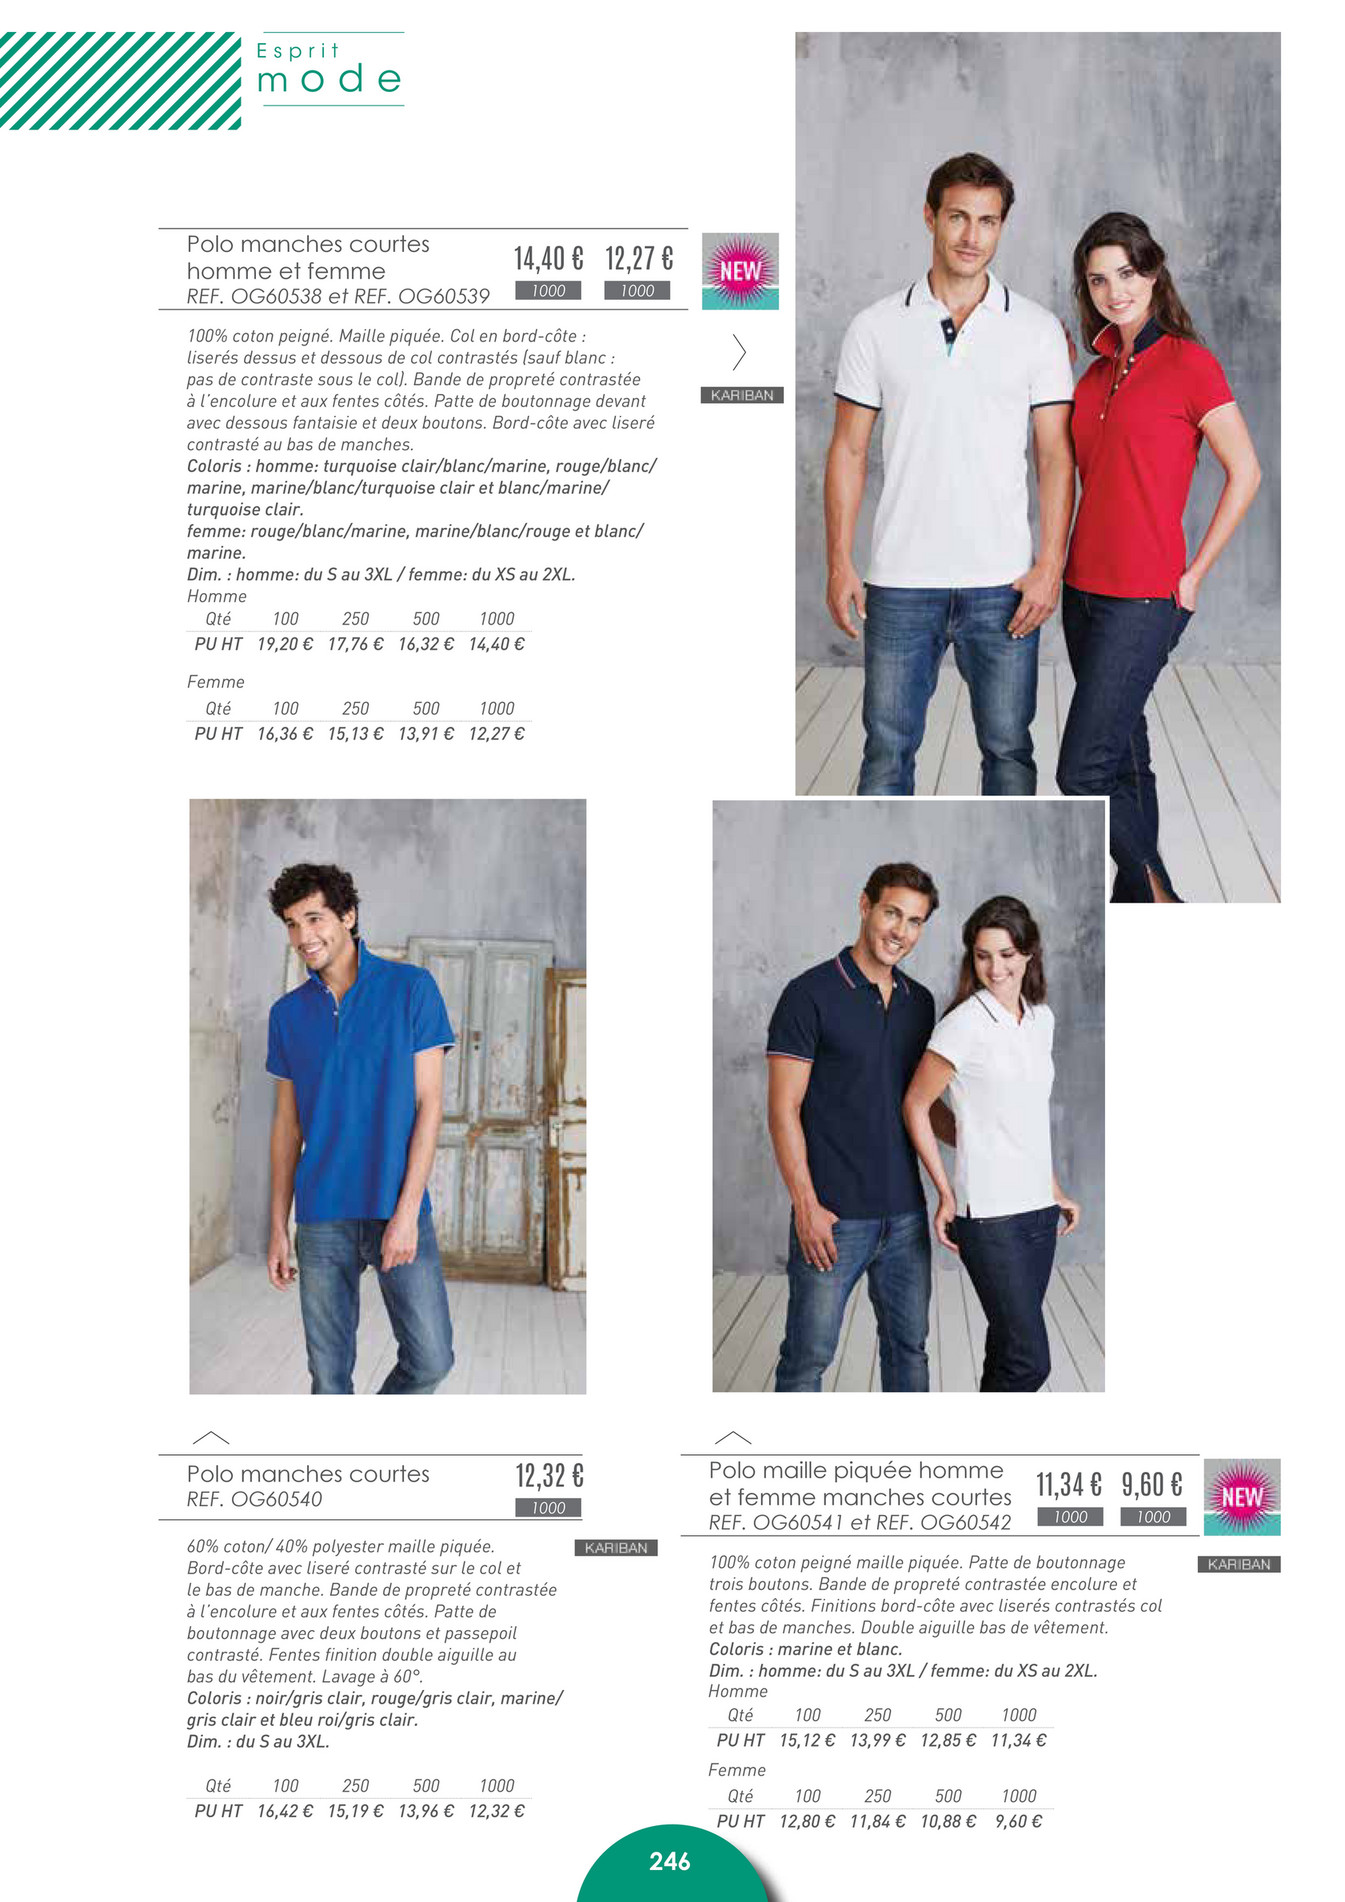 Promedif Catalogue Promedif 2015 Page 250 251 Created With